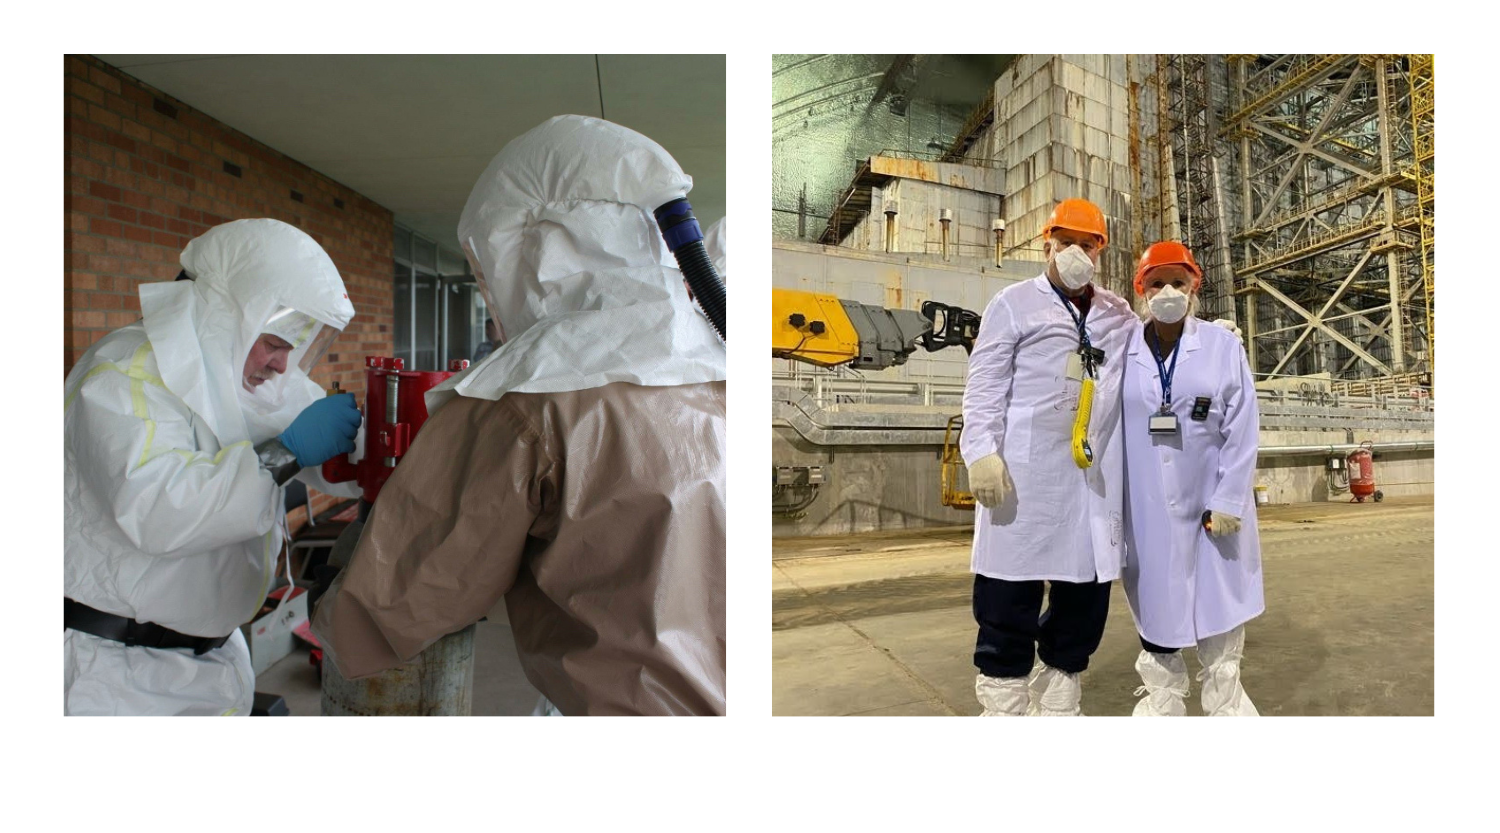 Dr. Lee B. Smith undergoes radiation training in Morgantown (left) and at the Chernobyl nuclear accident site in Ukraine (right).